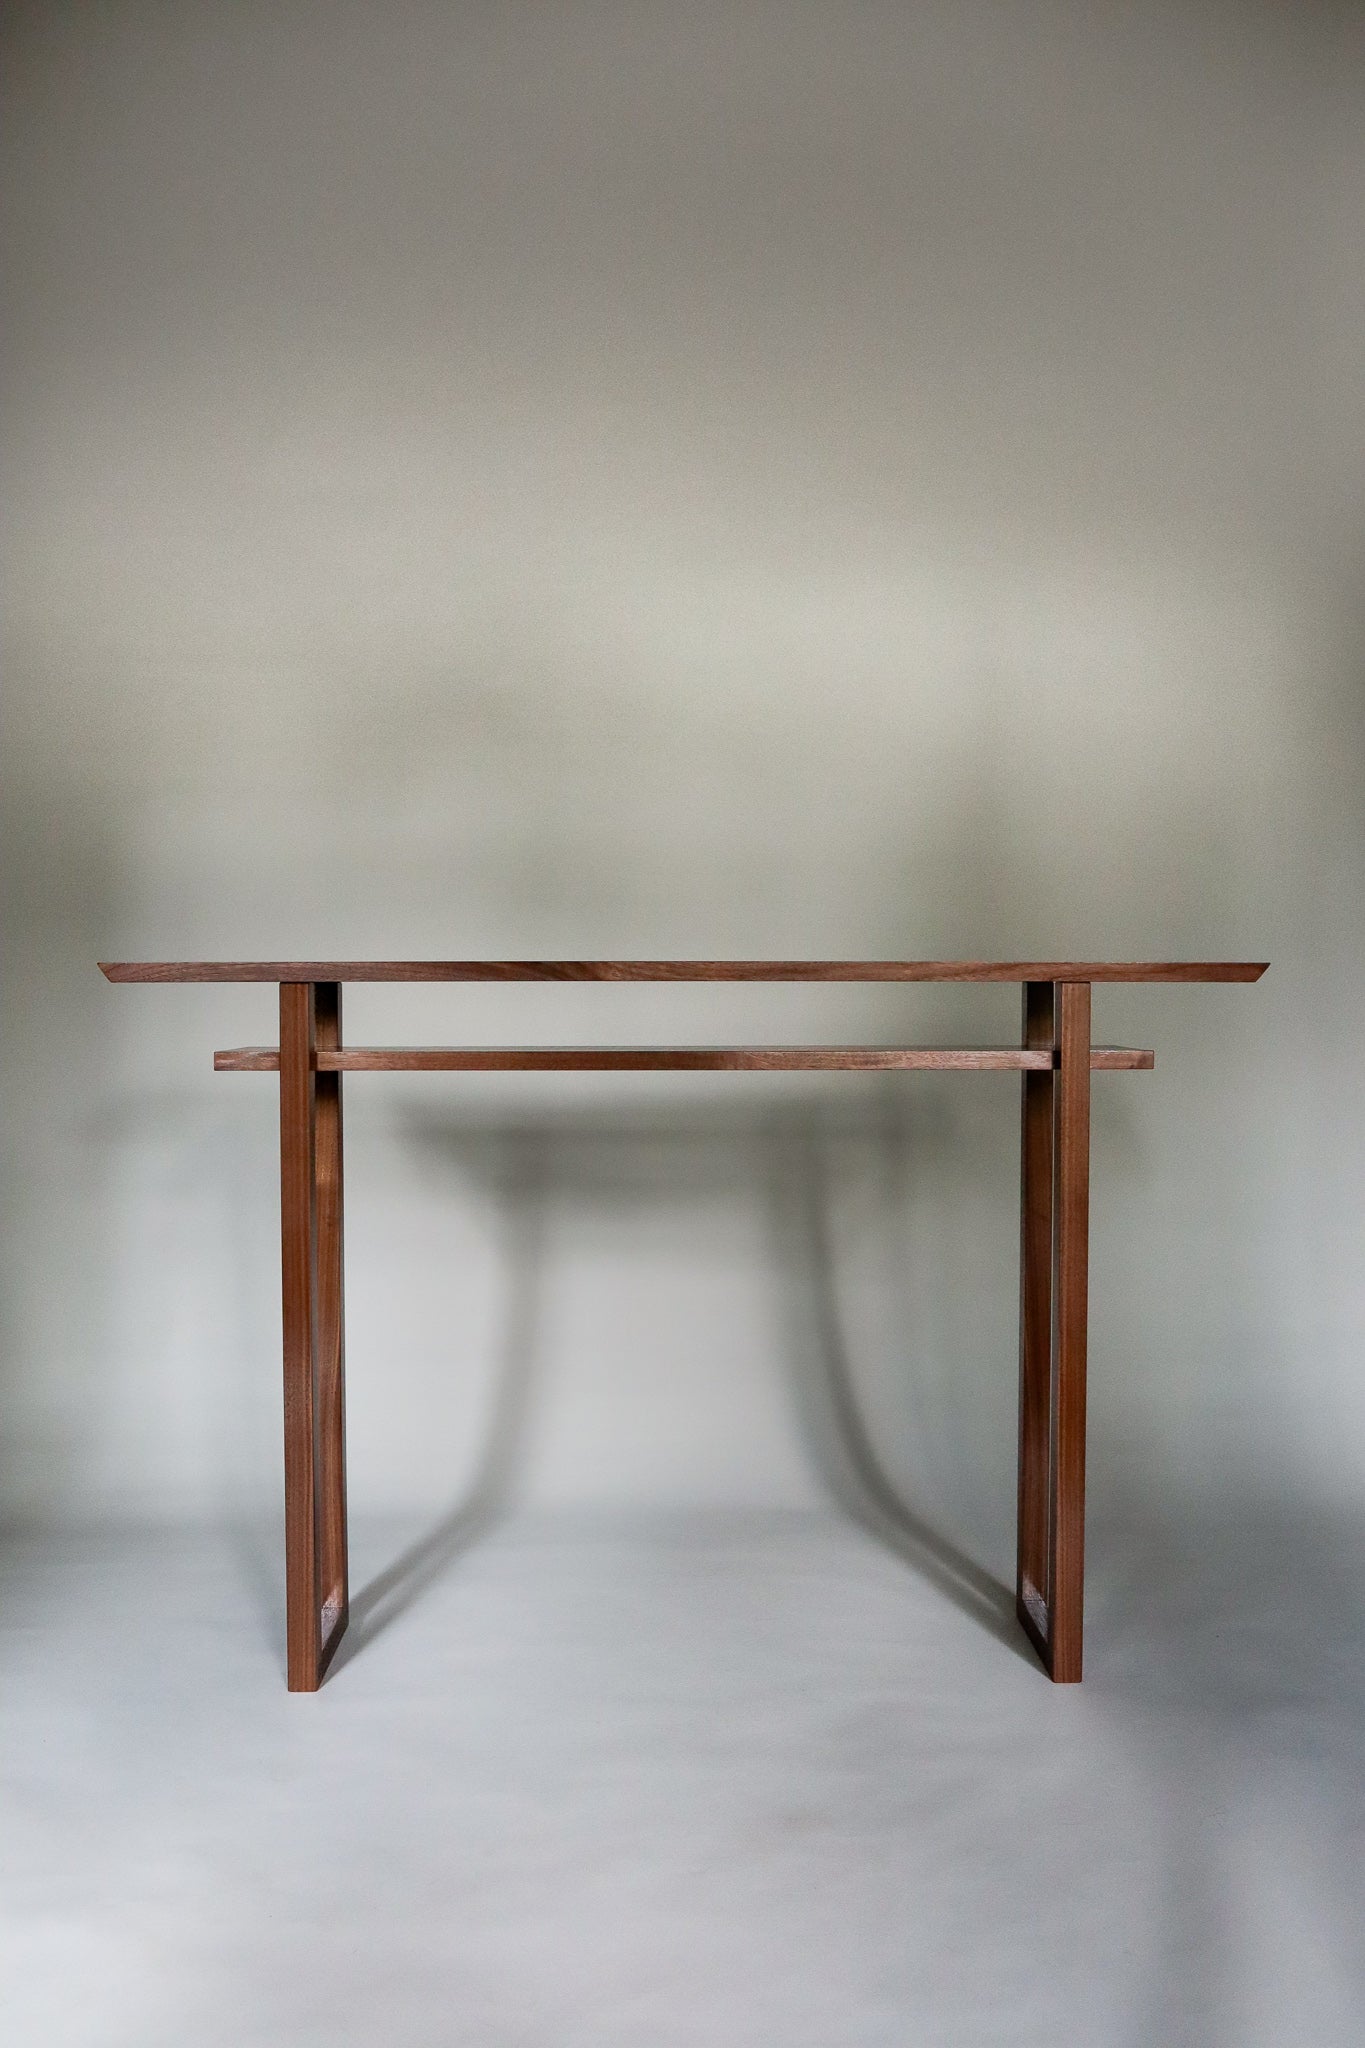 a modern console table for entryway decor or a narrow hall table.  This narrow console table with shelf is handmade from solid walnut wood by Mokuzai Furniture.